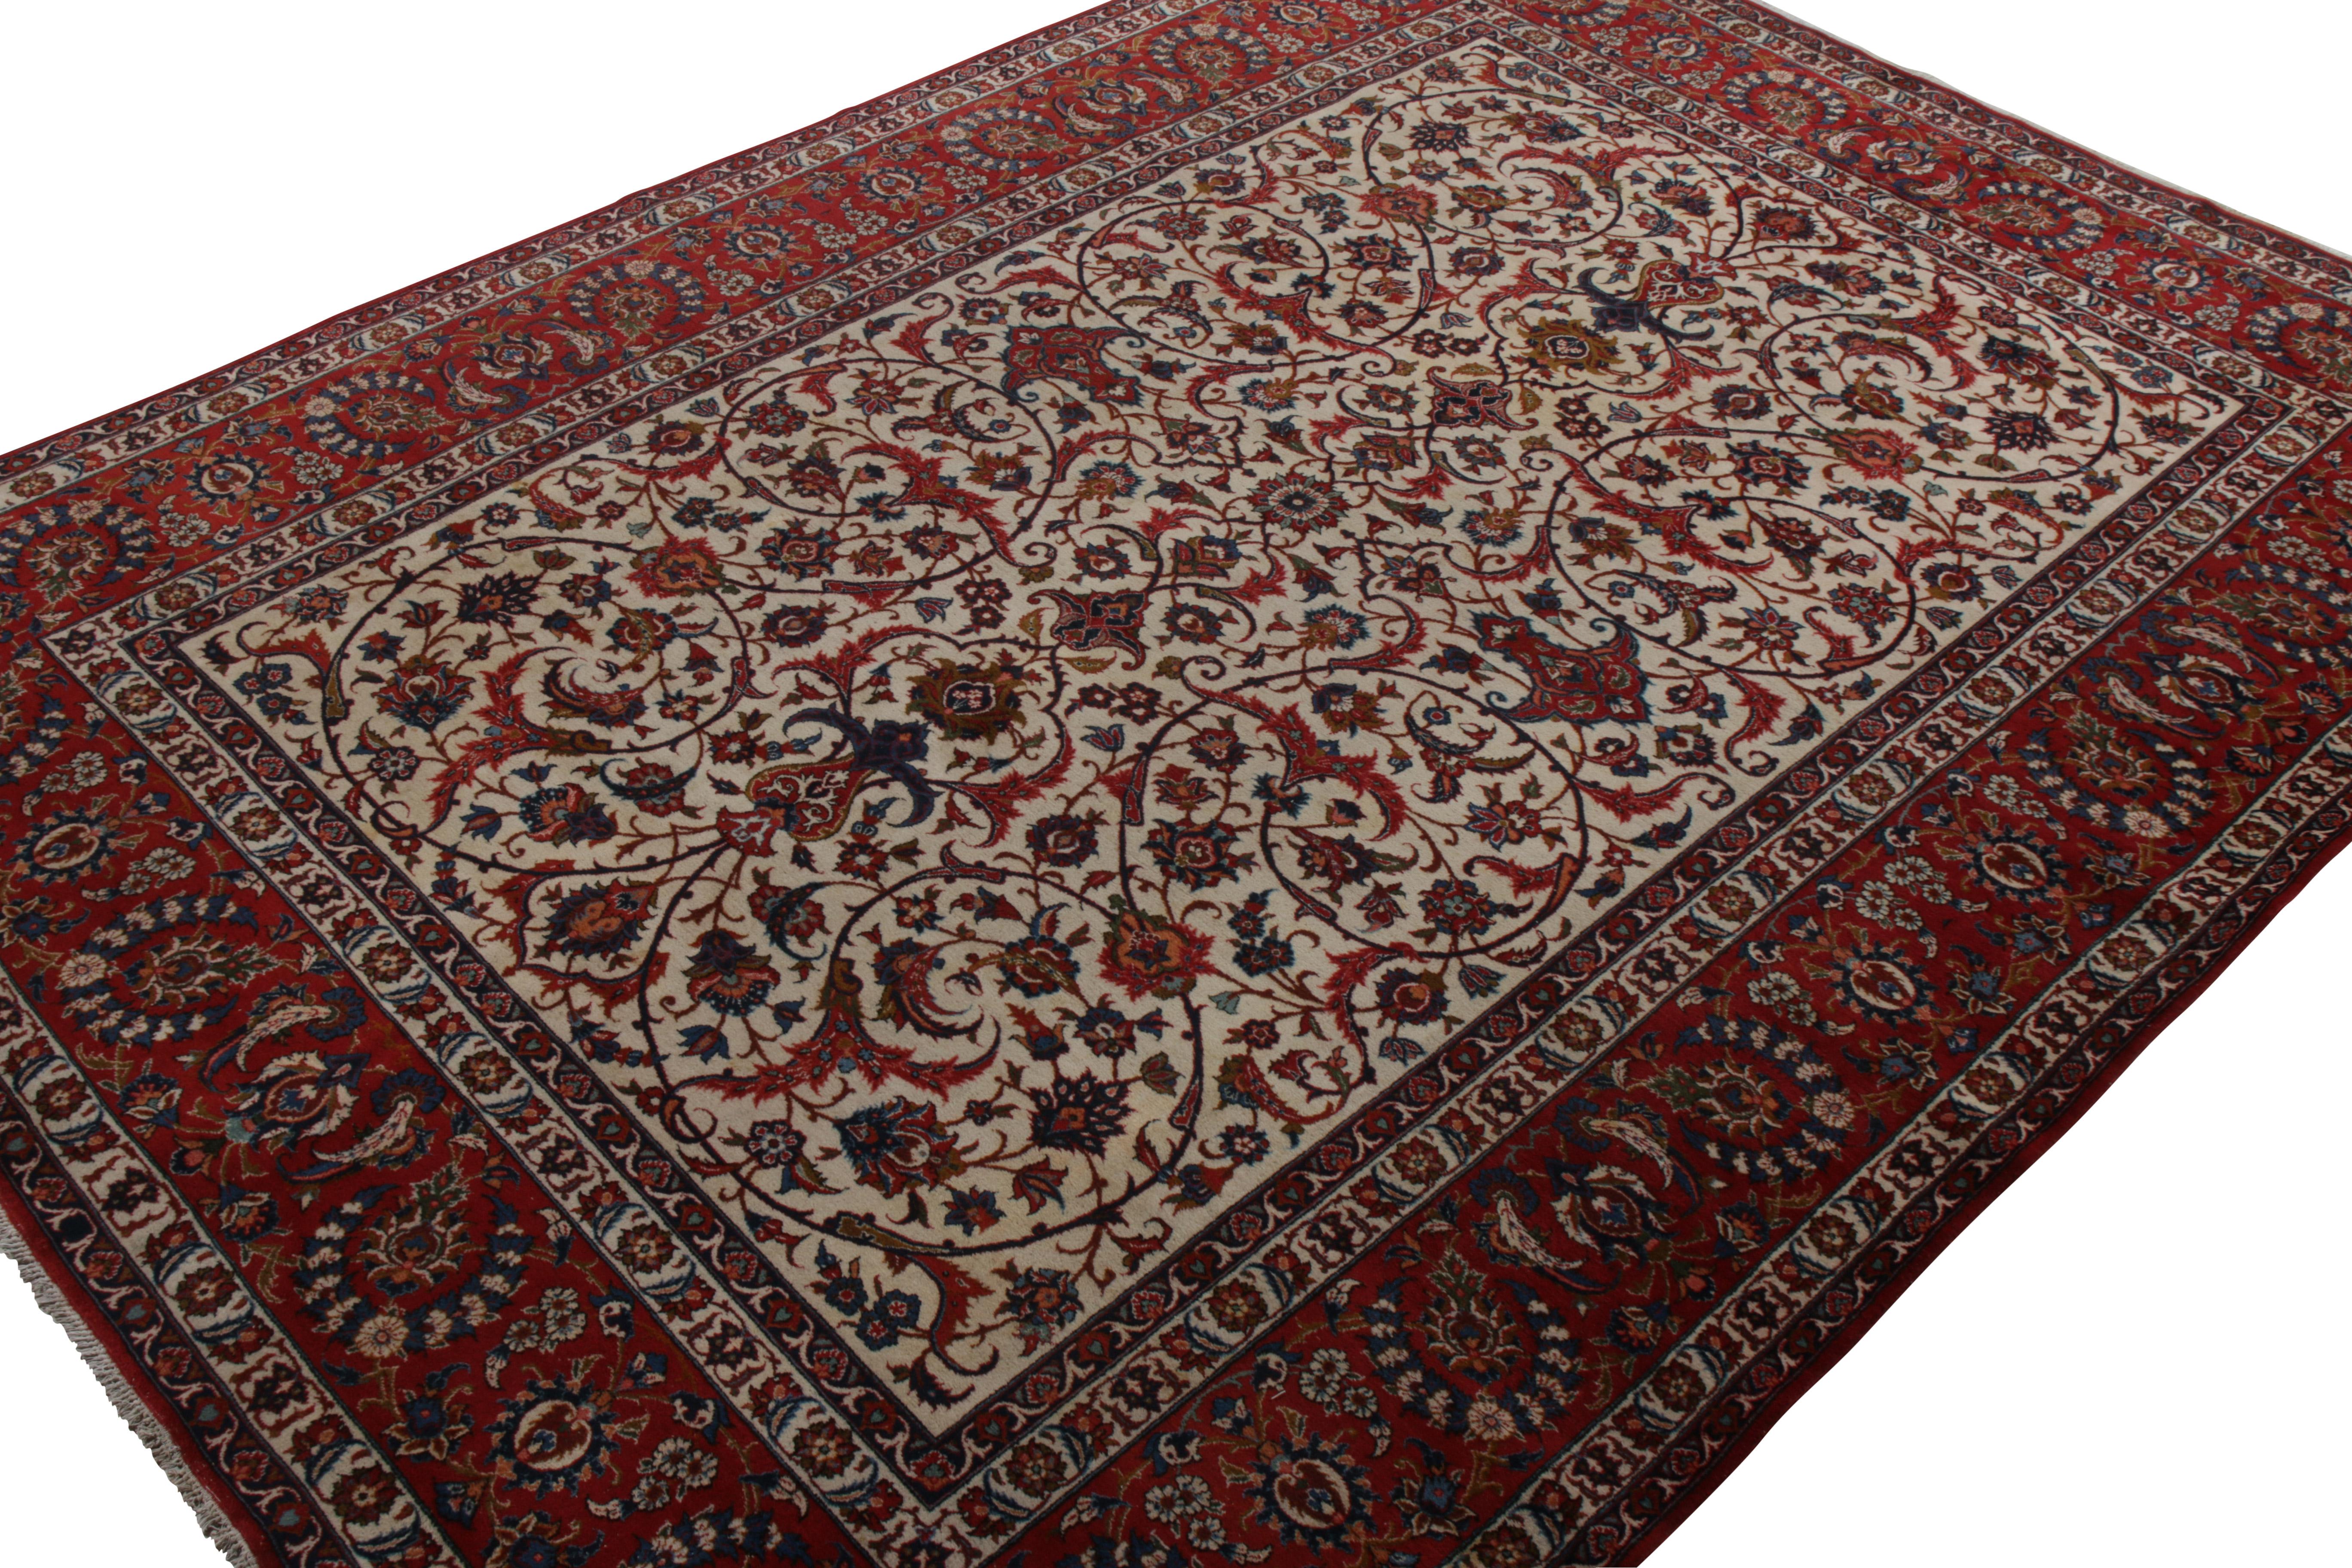 Persian Hand-Knotted Vintage Isfahan Rug in All over Red, Blue, Beige Floral Pattern For Sale